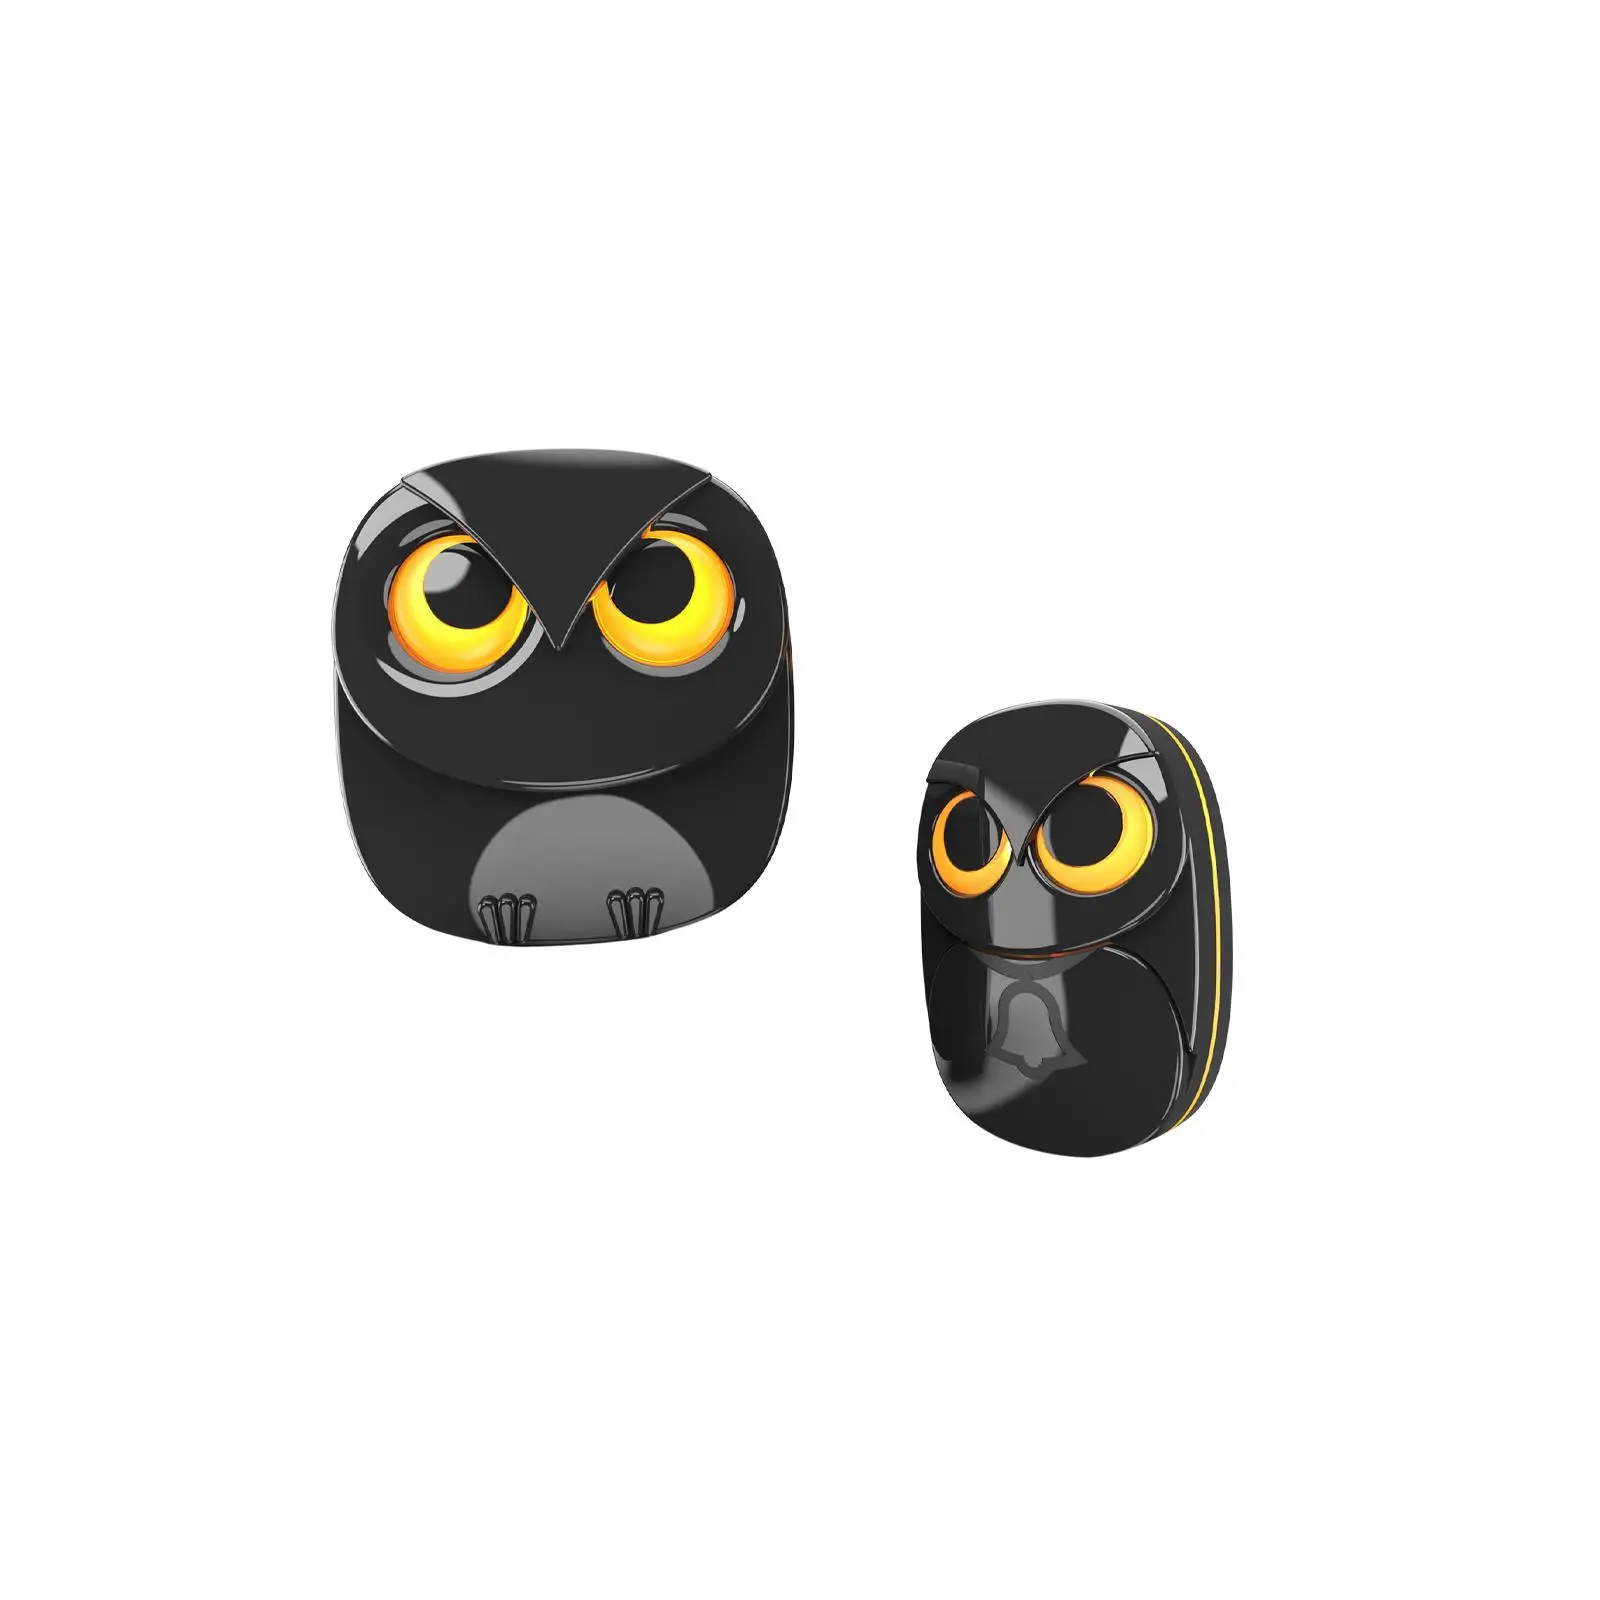 Wireless Driveway Security Alarm Convenient Cute Waterproof Accessories Decor Owl Shape for Front Porch Shed Garage Gate UK Plug